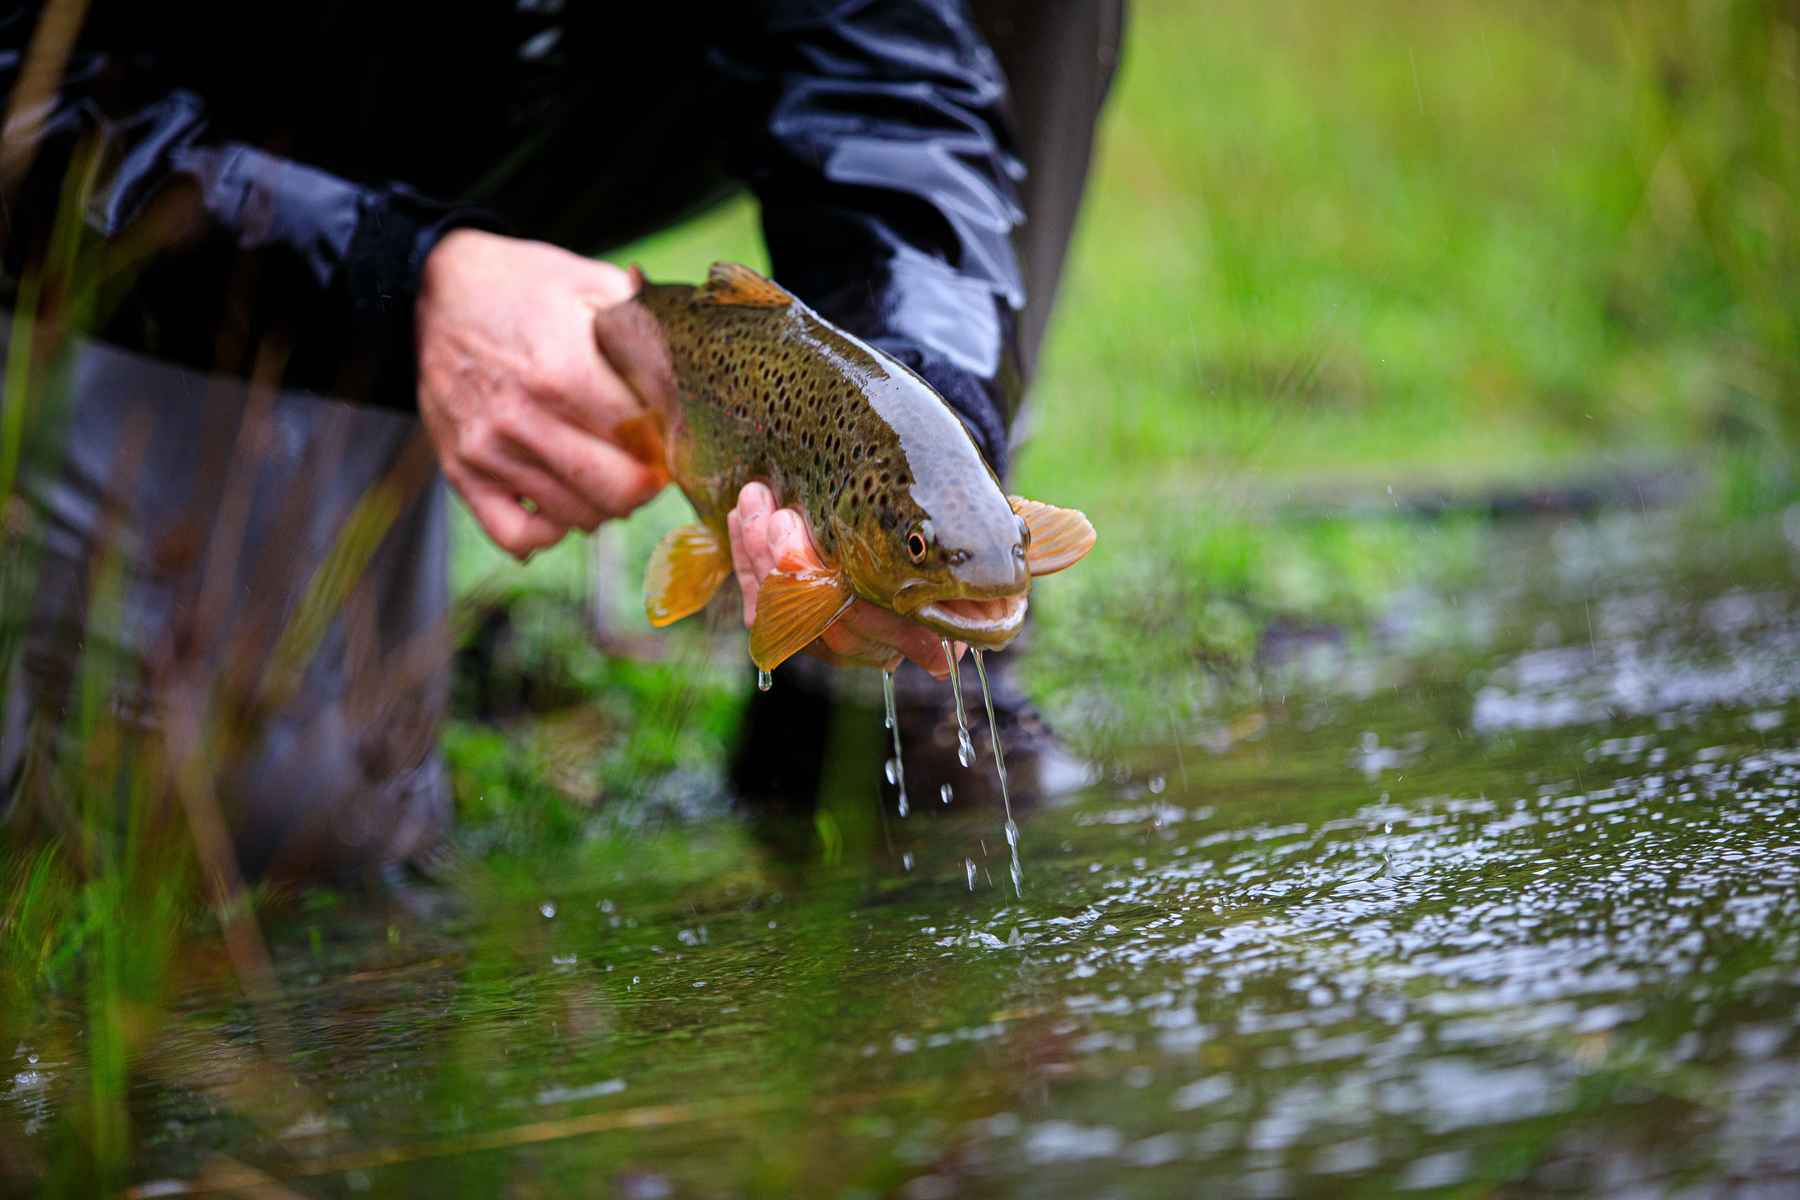 Fly fishing is more popular than ever